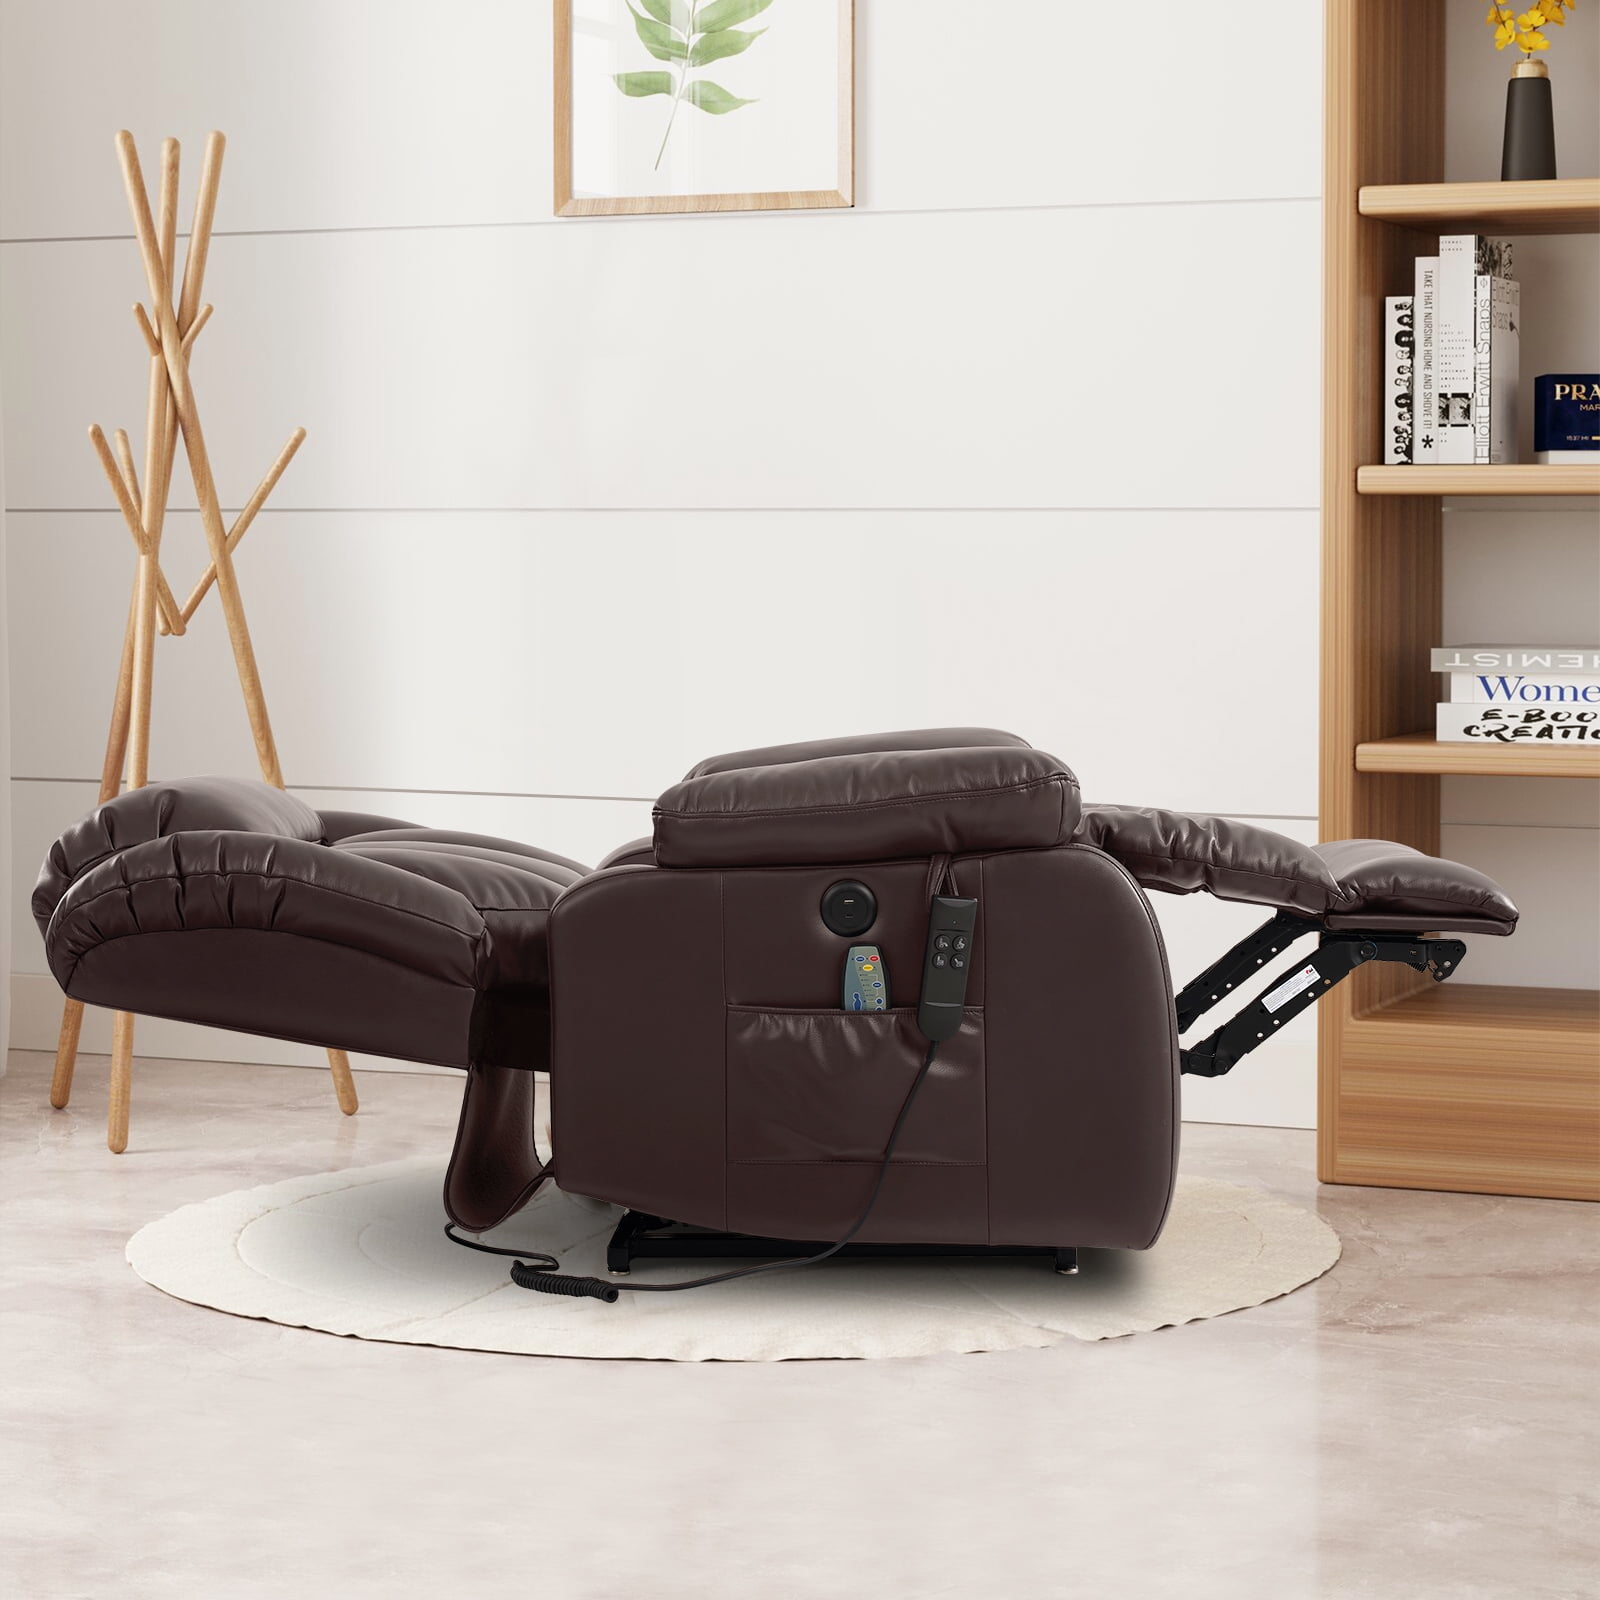 TEKAMON Infinite Position Leather Lift Recliner Chair with Heat and Massage